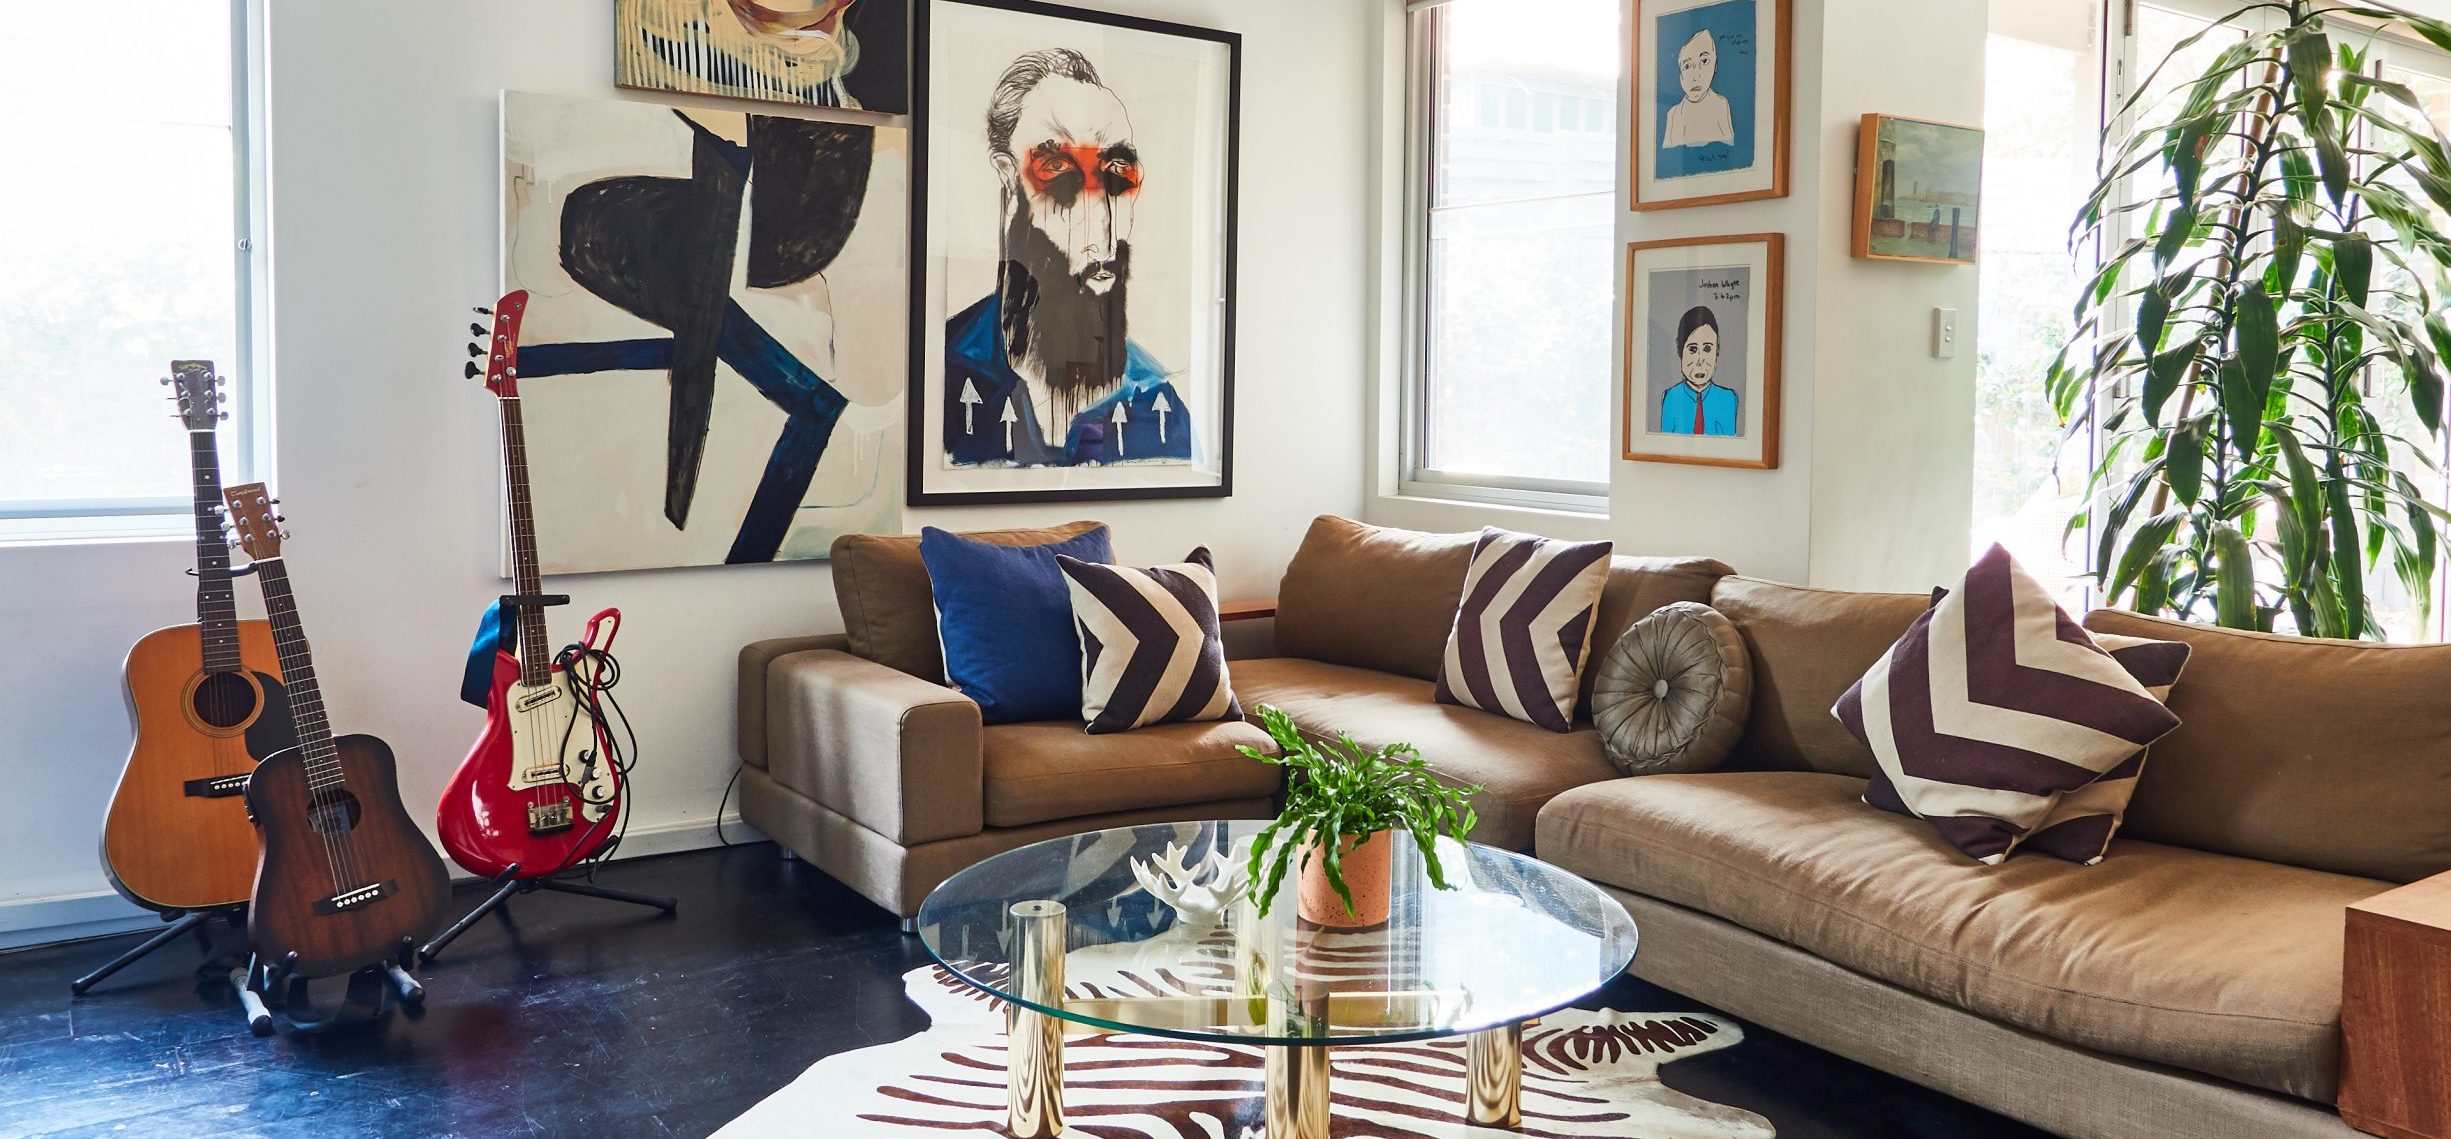 Eclectic living room with guitars, animal rug, plant and multiple artworks